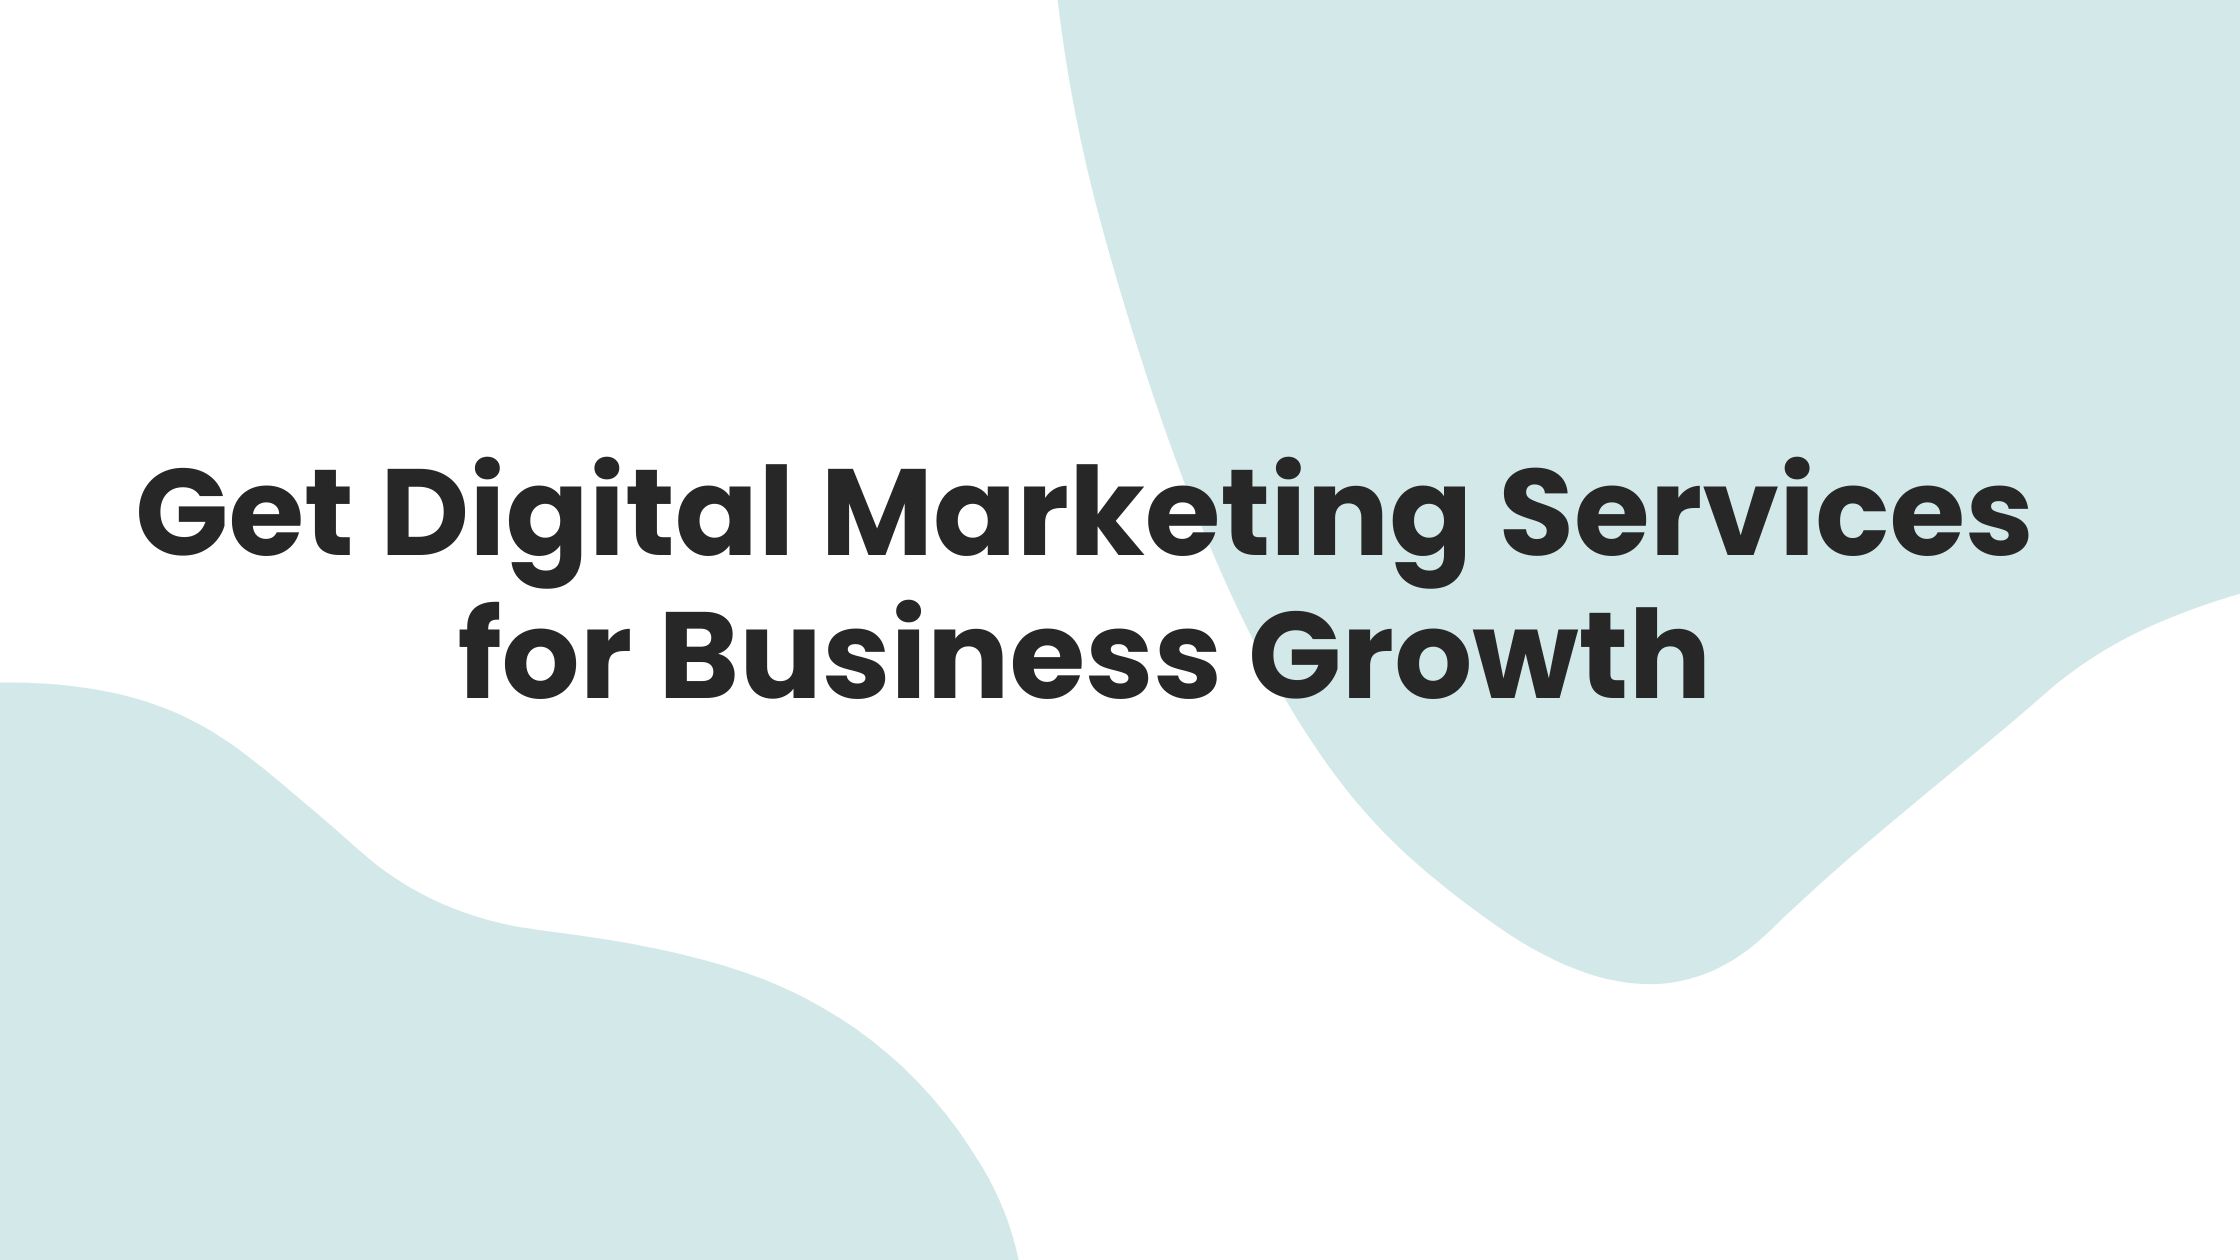 Get Digital Marketing Services for Business Growth